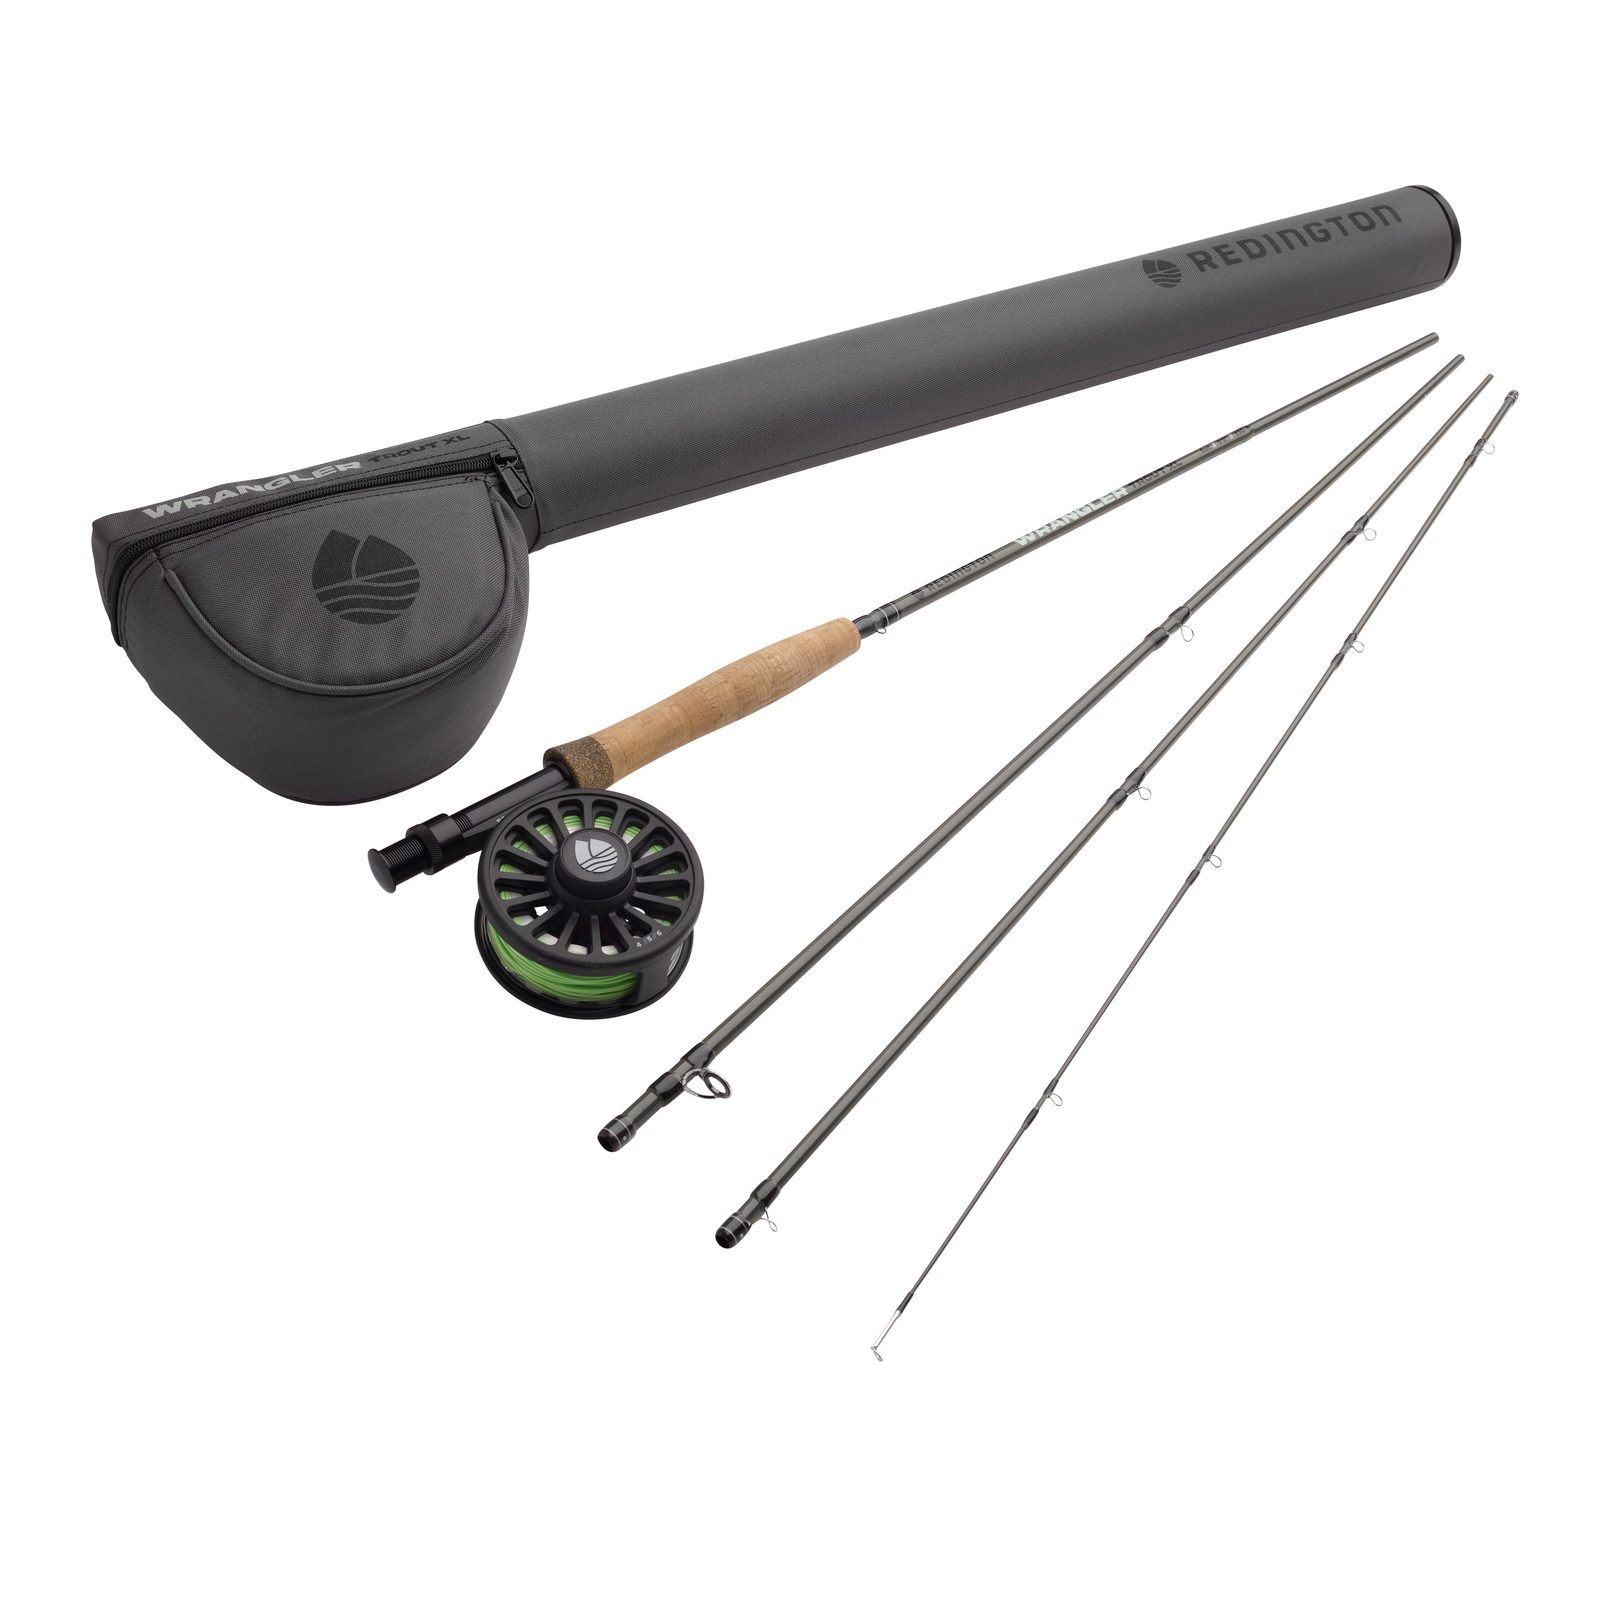 Wild Water Deluxe Fly Fishing Combo Starter Kit, 5 Weight 8 Foot Fly Rod,  4-Piece Graphite Rod with Cork Handle, Accessories, Die Cast Aluminum Reel